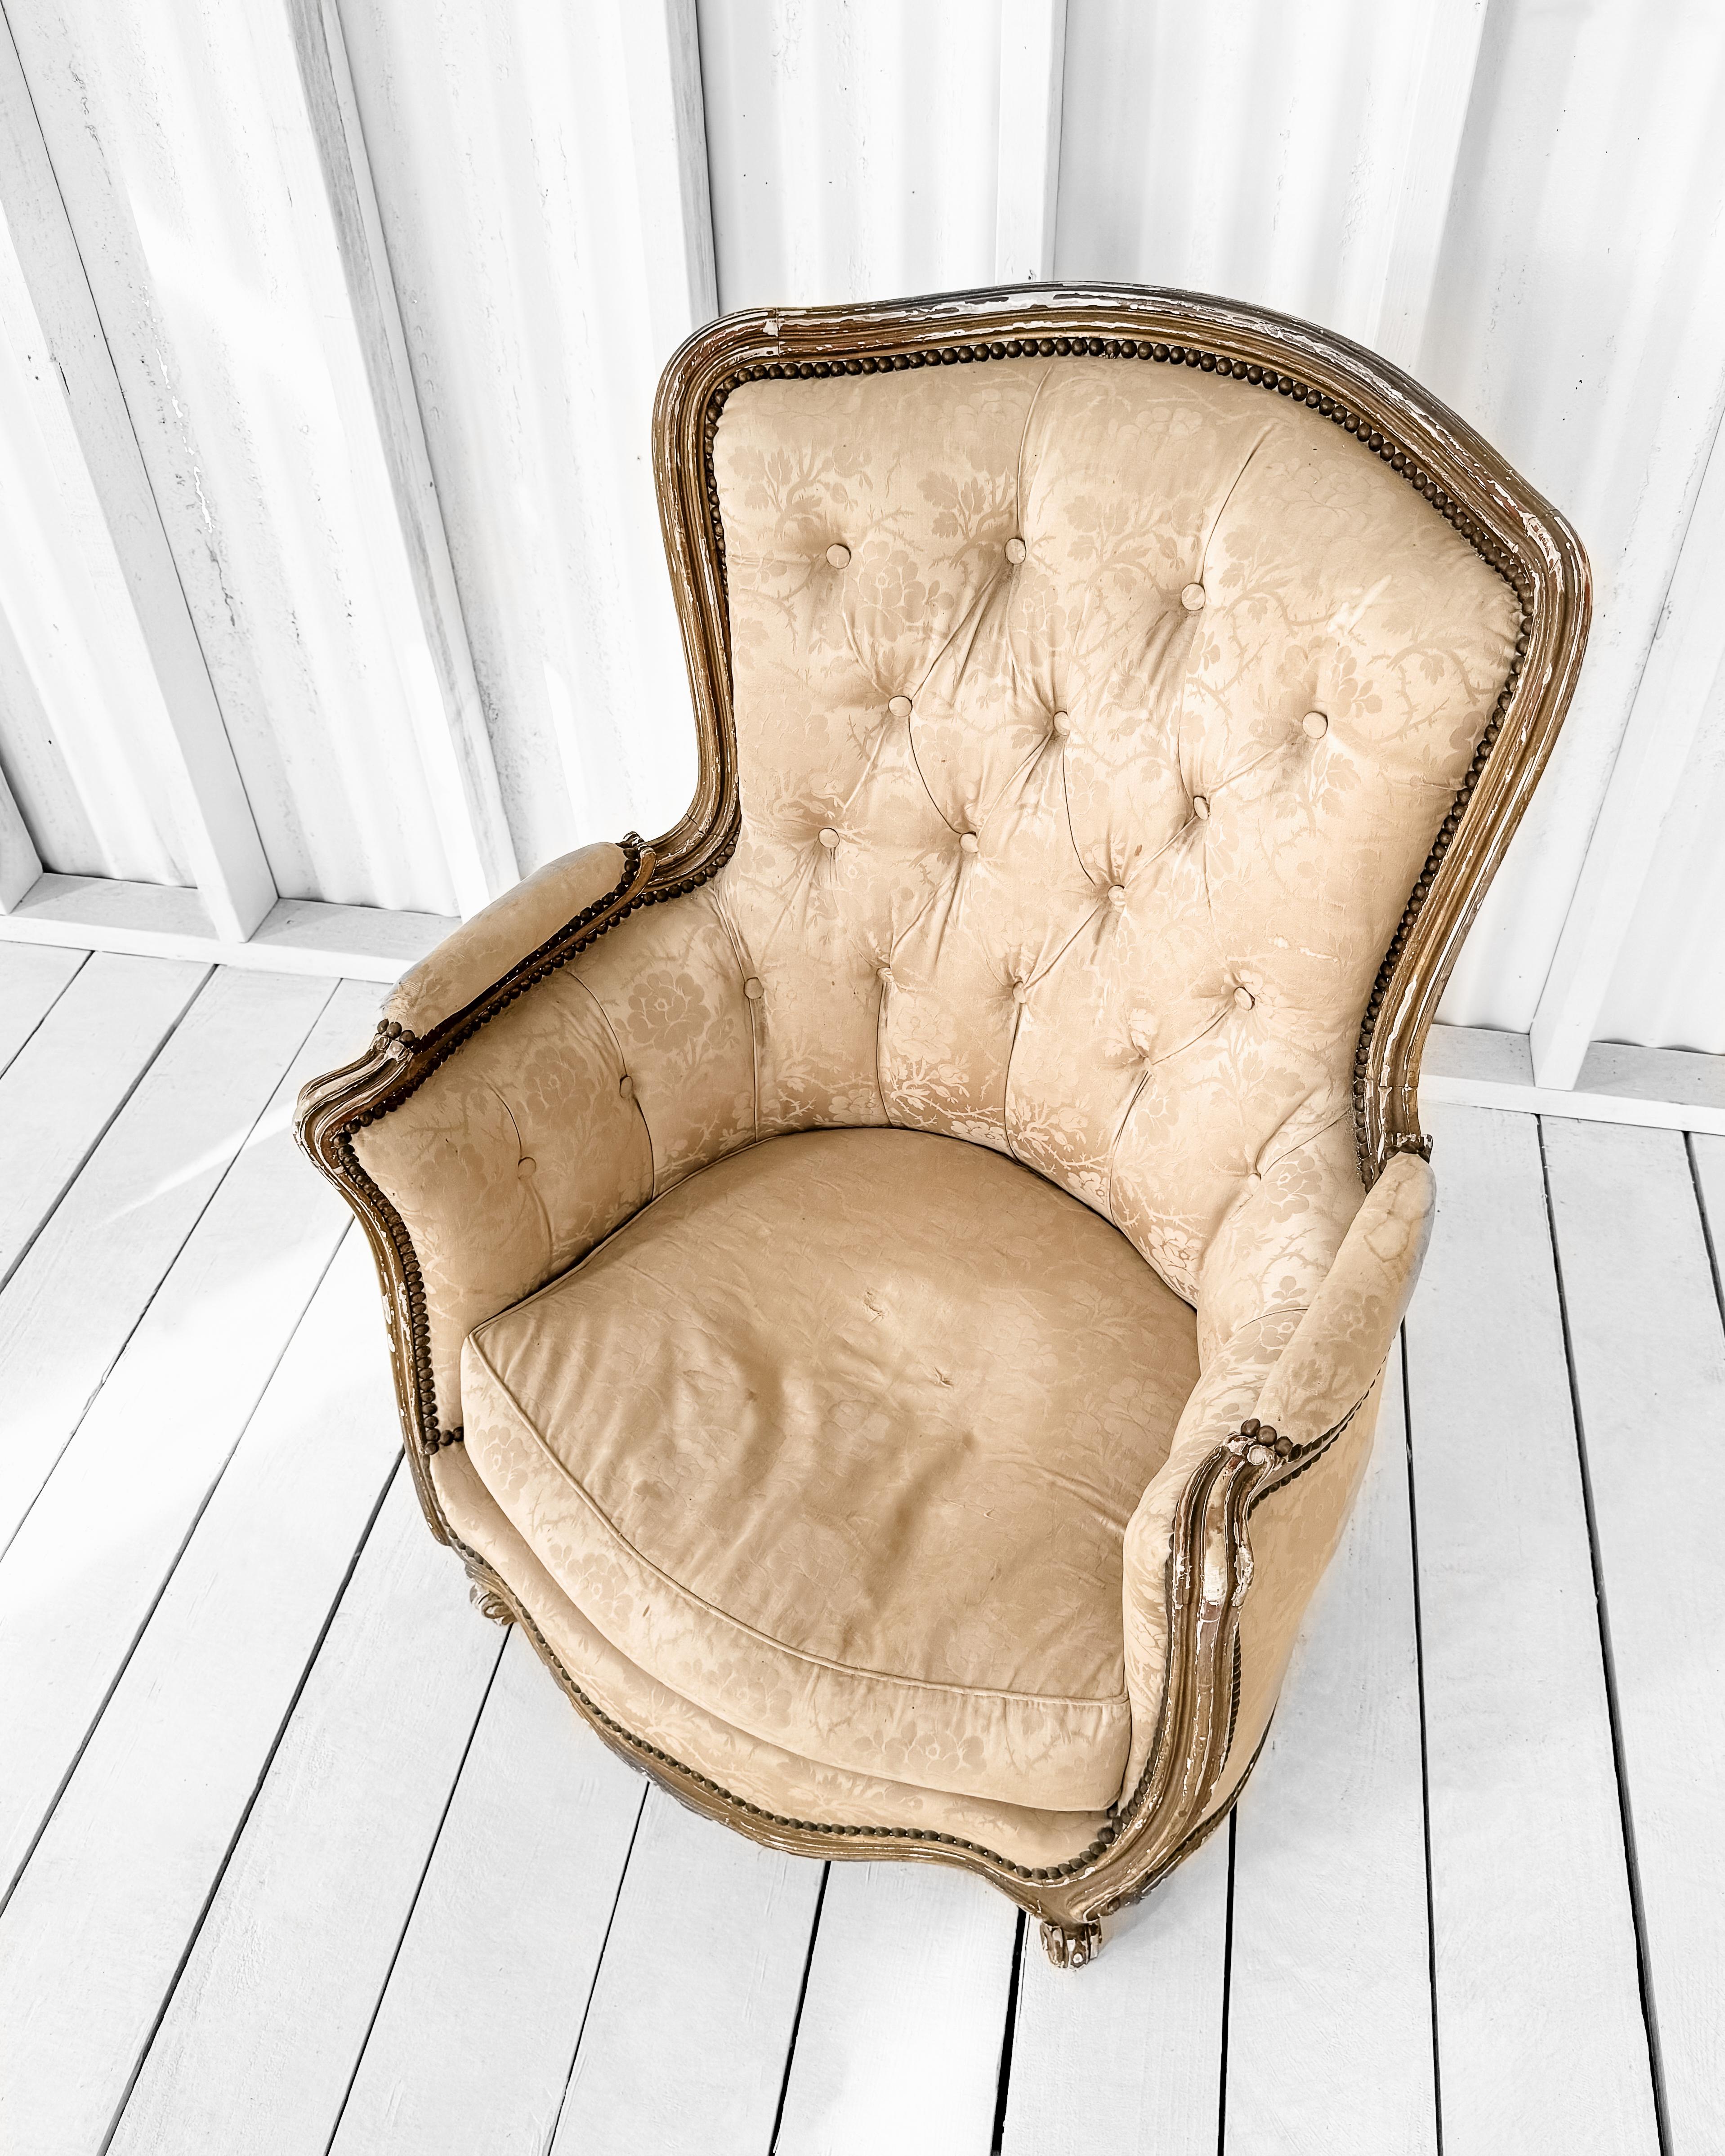 Tufted Silk Damask Louis XV Style Bergere Chair In Good Condition For Sale In Mckinney, TX